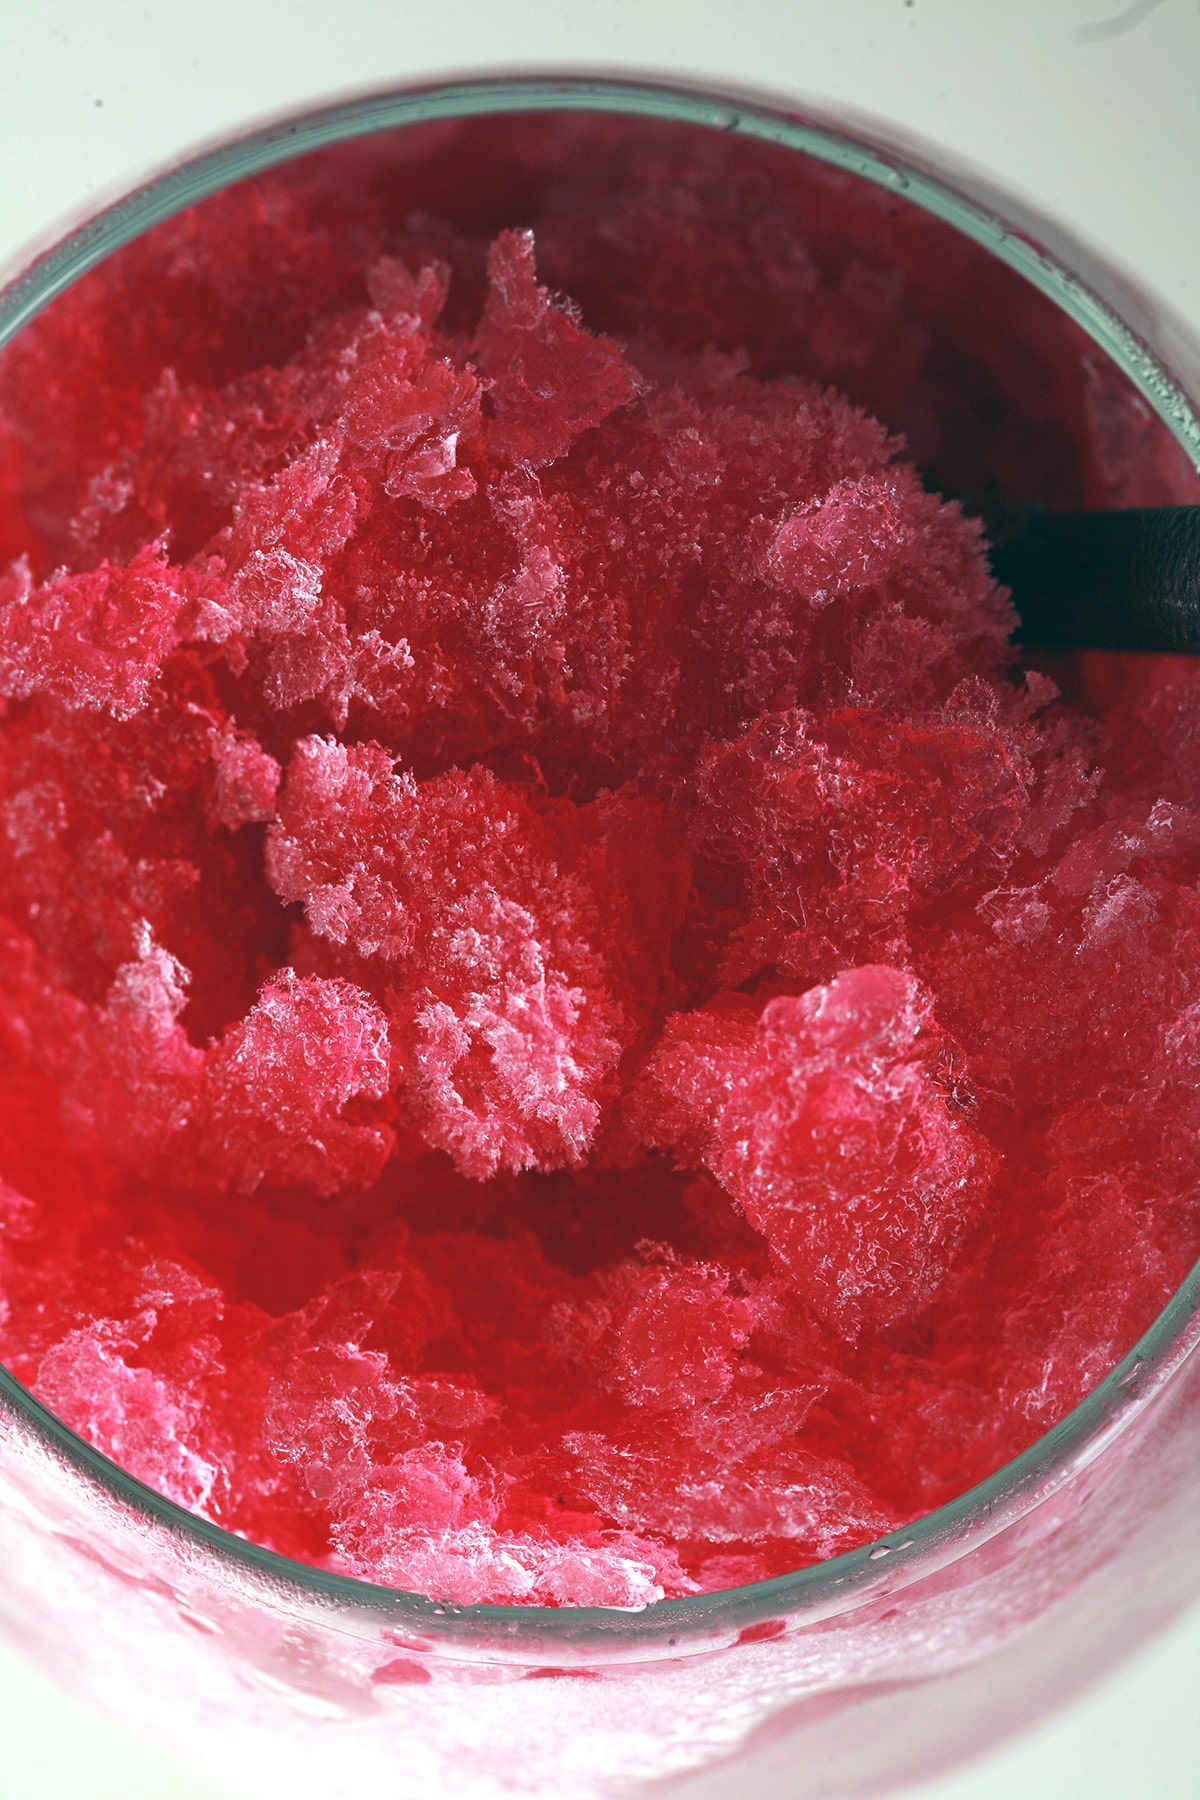 A close up view of a deep pink wine slush, made from our mix. It's in a frosted wine glass, and was made from our wine slush mix.